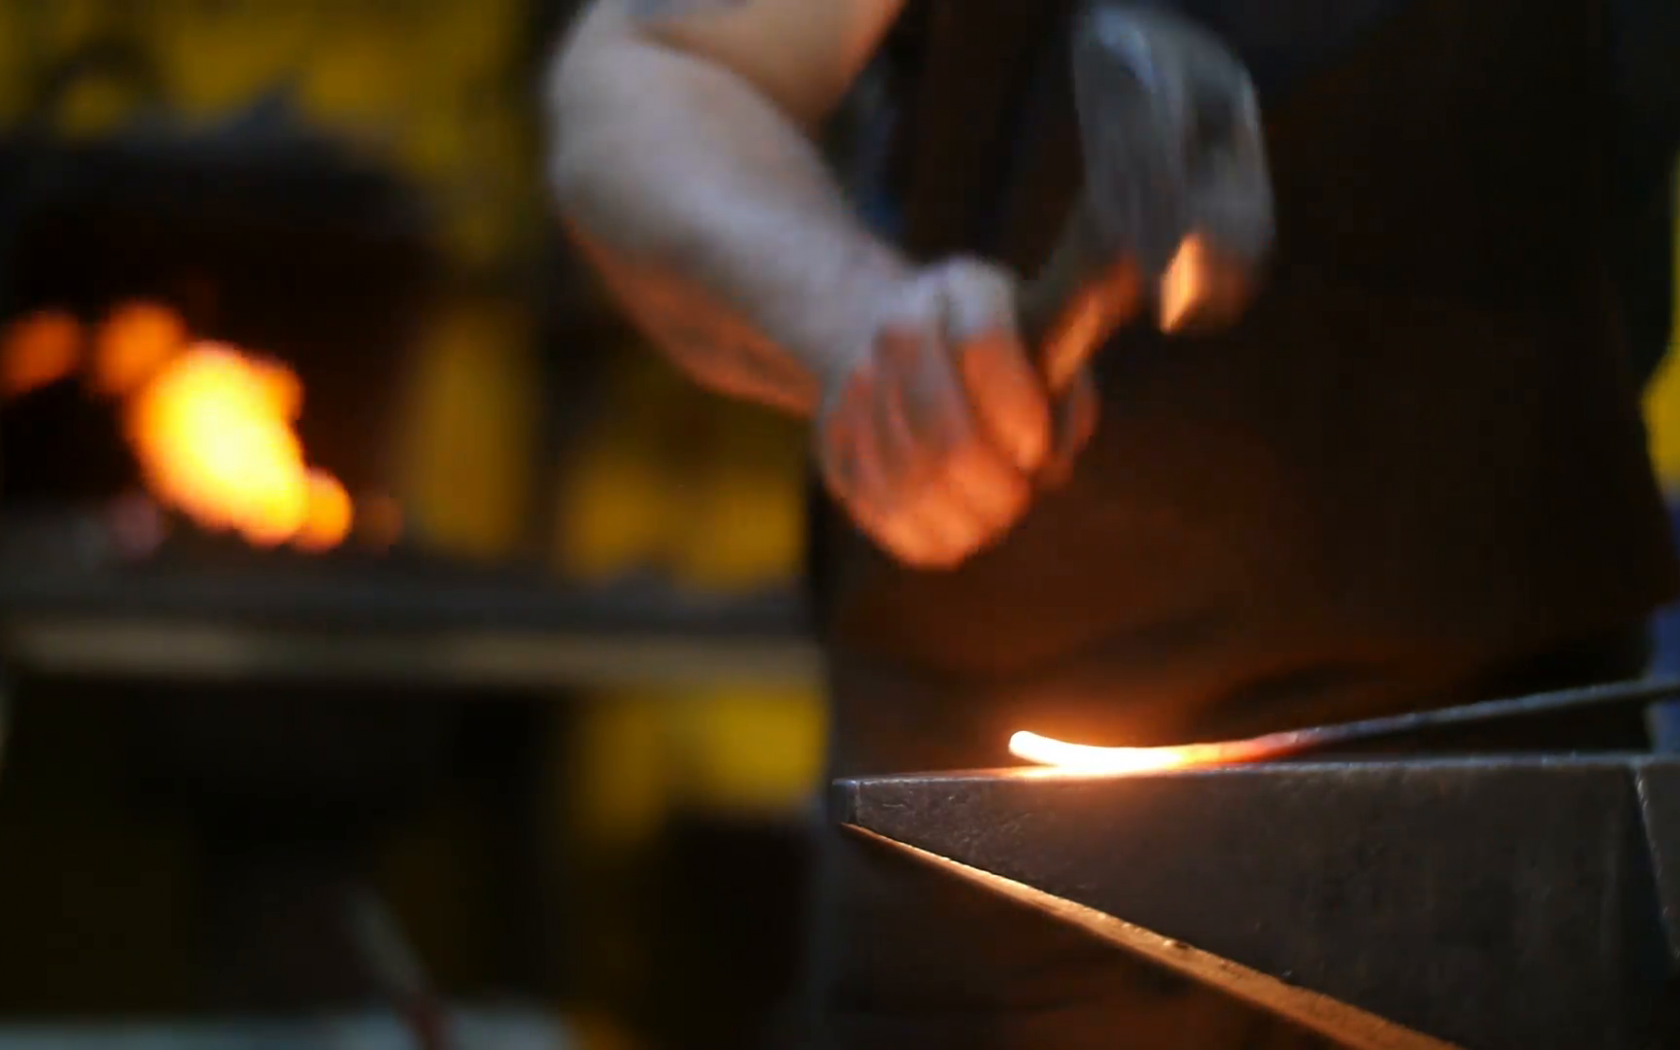 Free download Forging a Sword on an Anvil in a Blacksmith Workshop